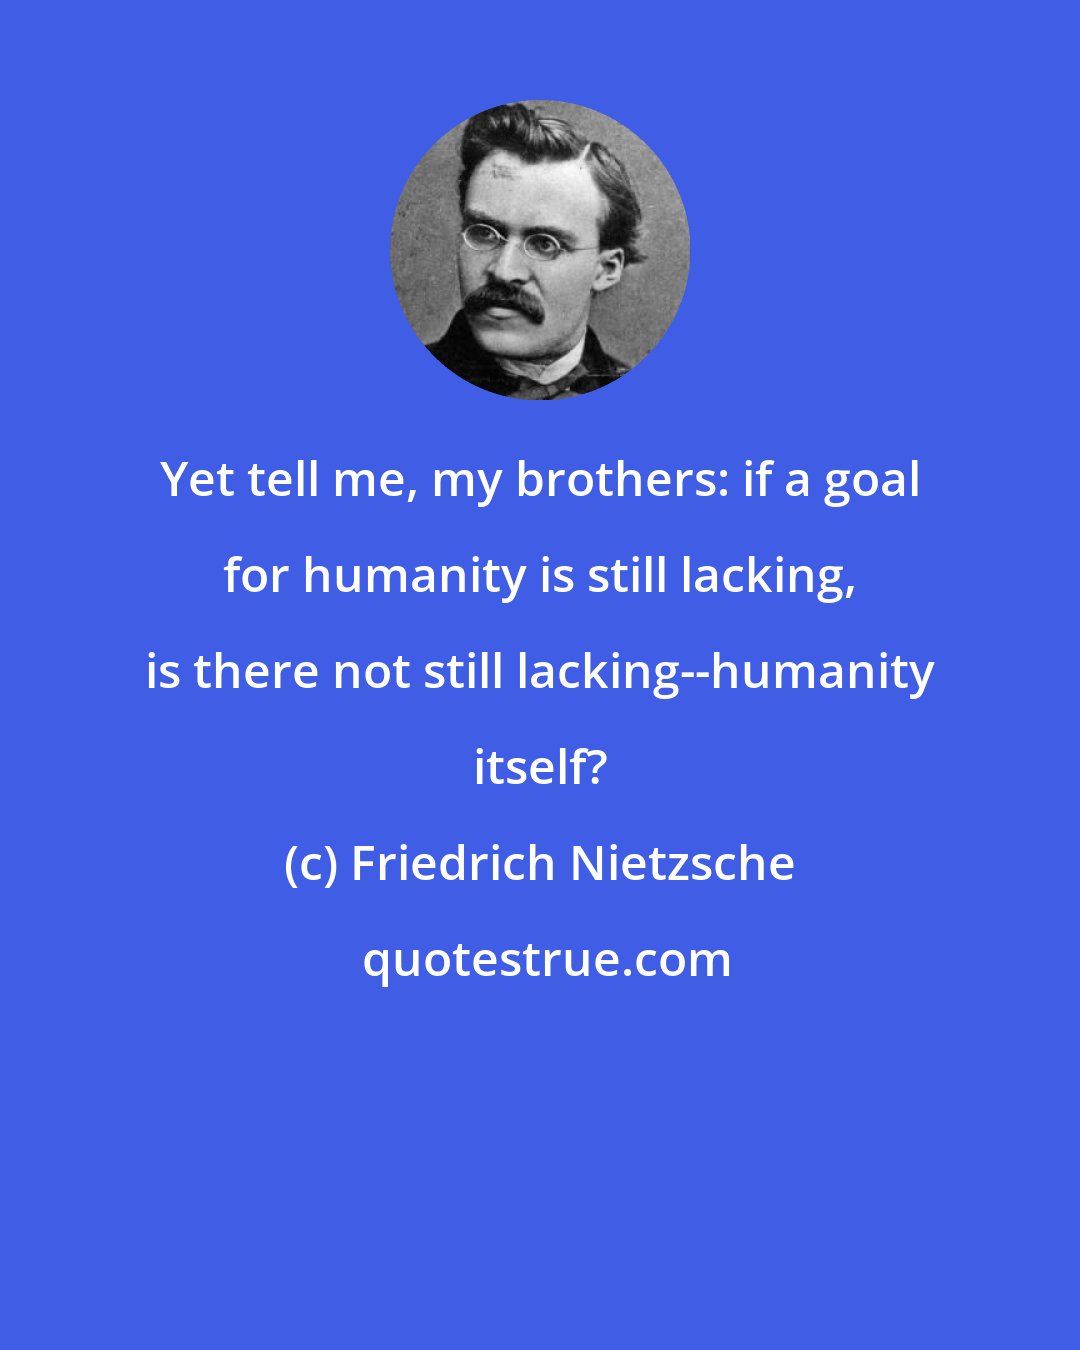 Friedrich Nietzsche: Yet tell me, my brothers: if a goal for humanity is still lacking, is there not still lacking--humanity itself?